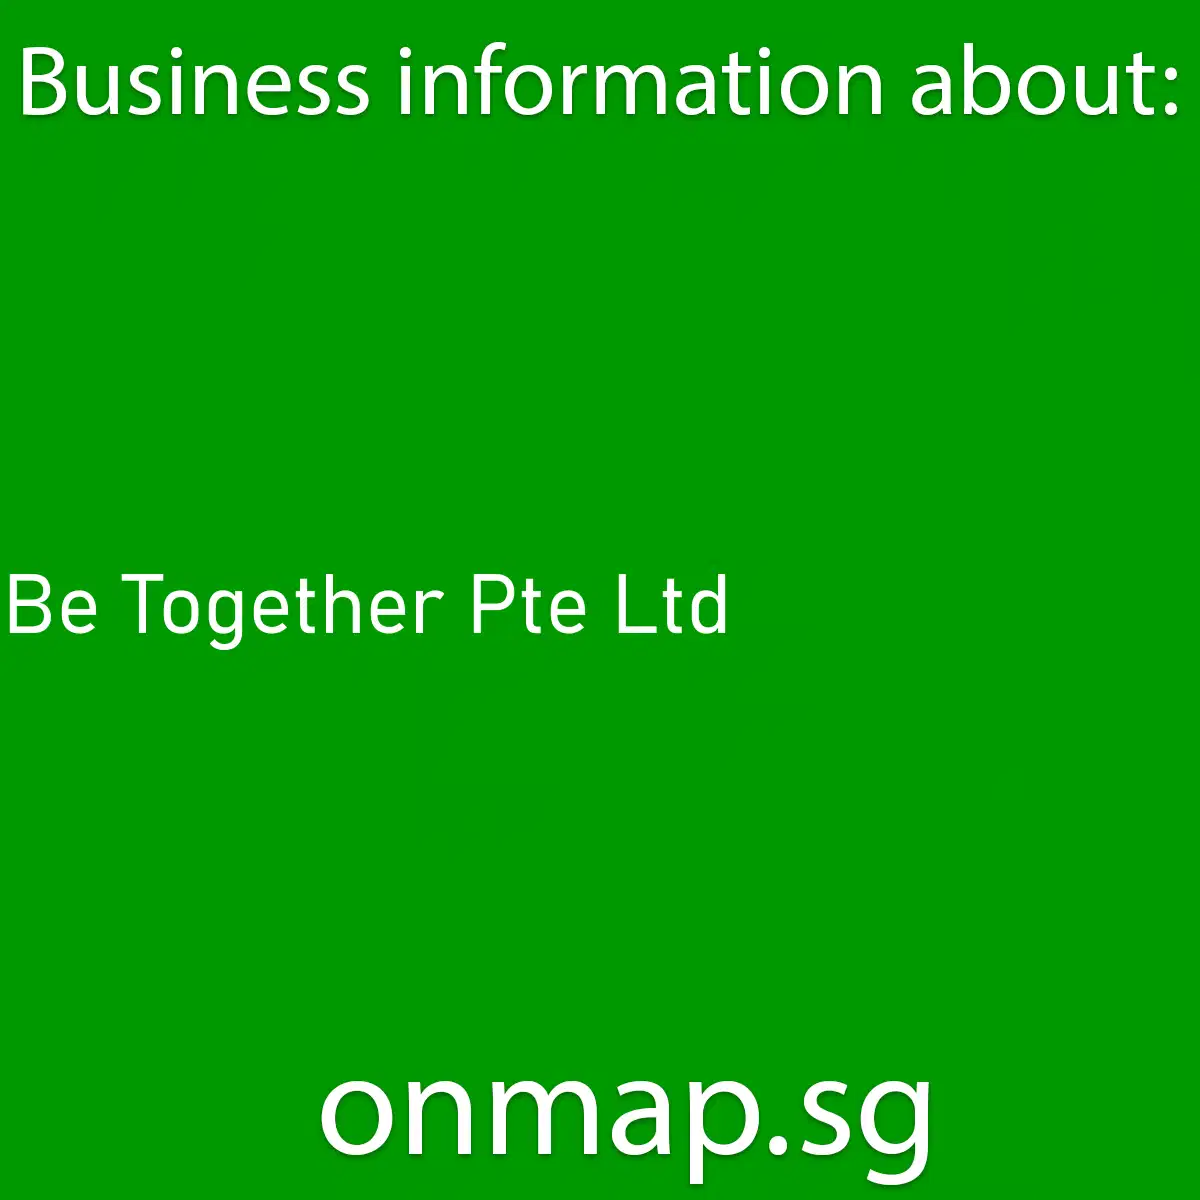 Be Together Pte. Ltd. - Details, Locations, Reviews